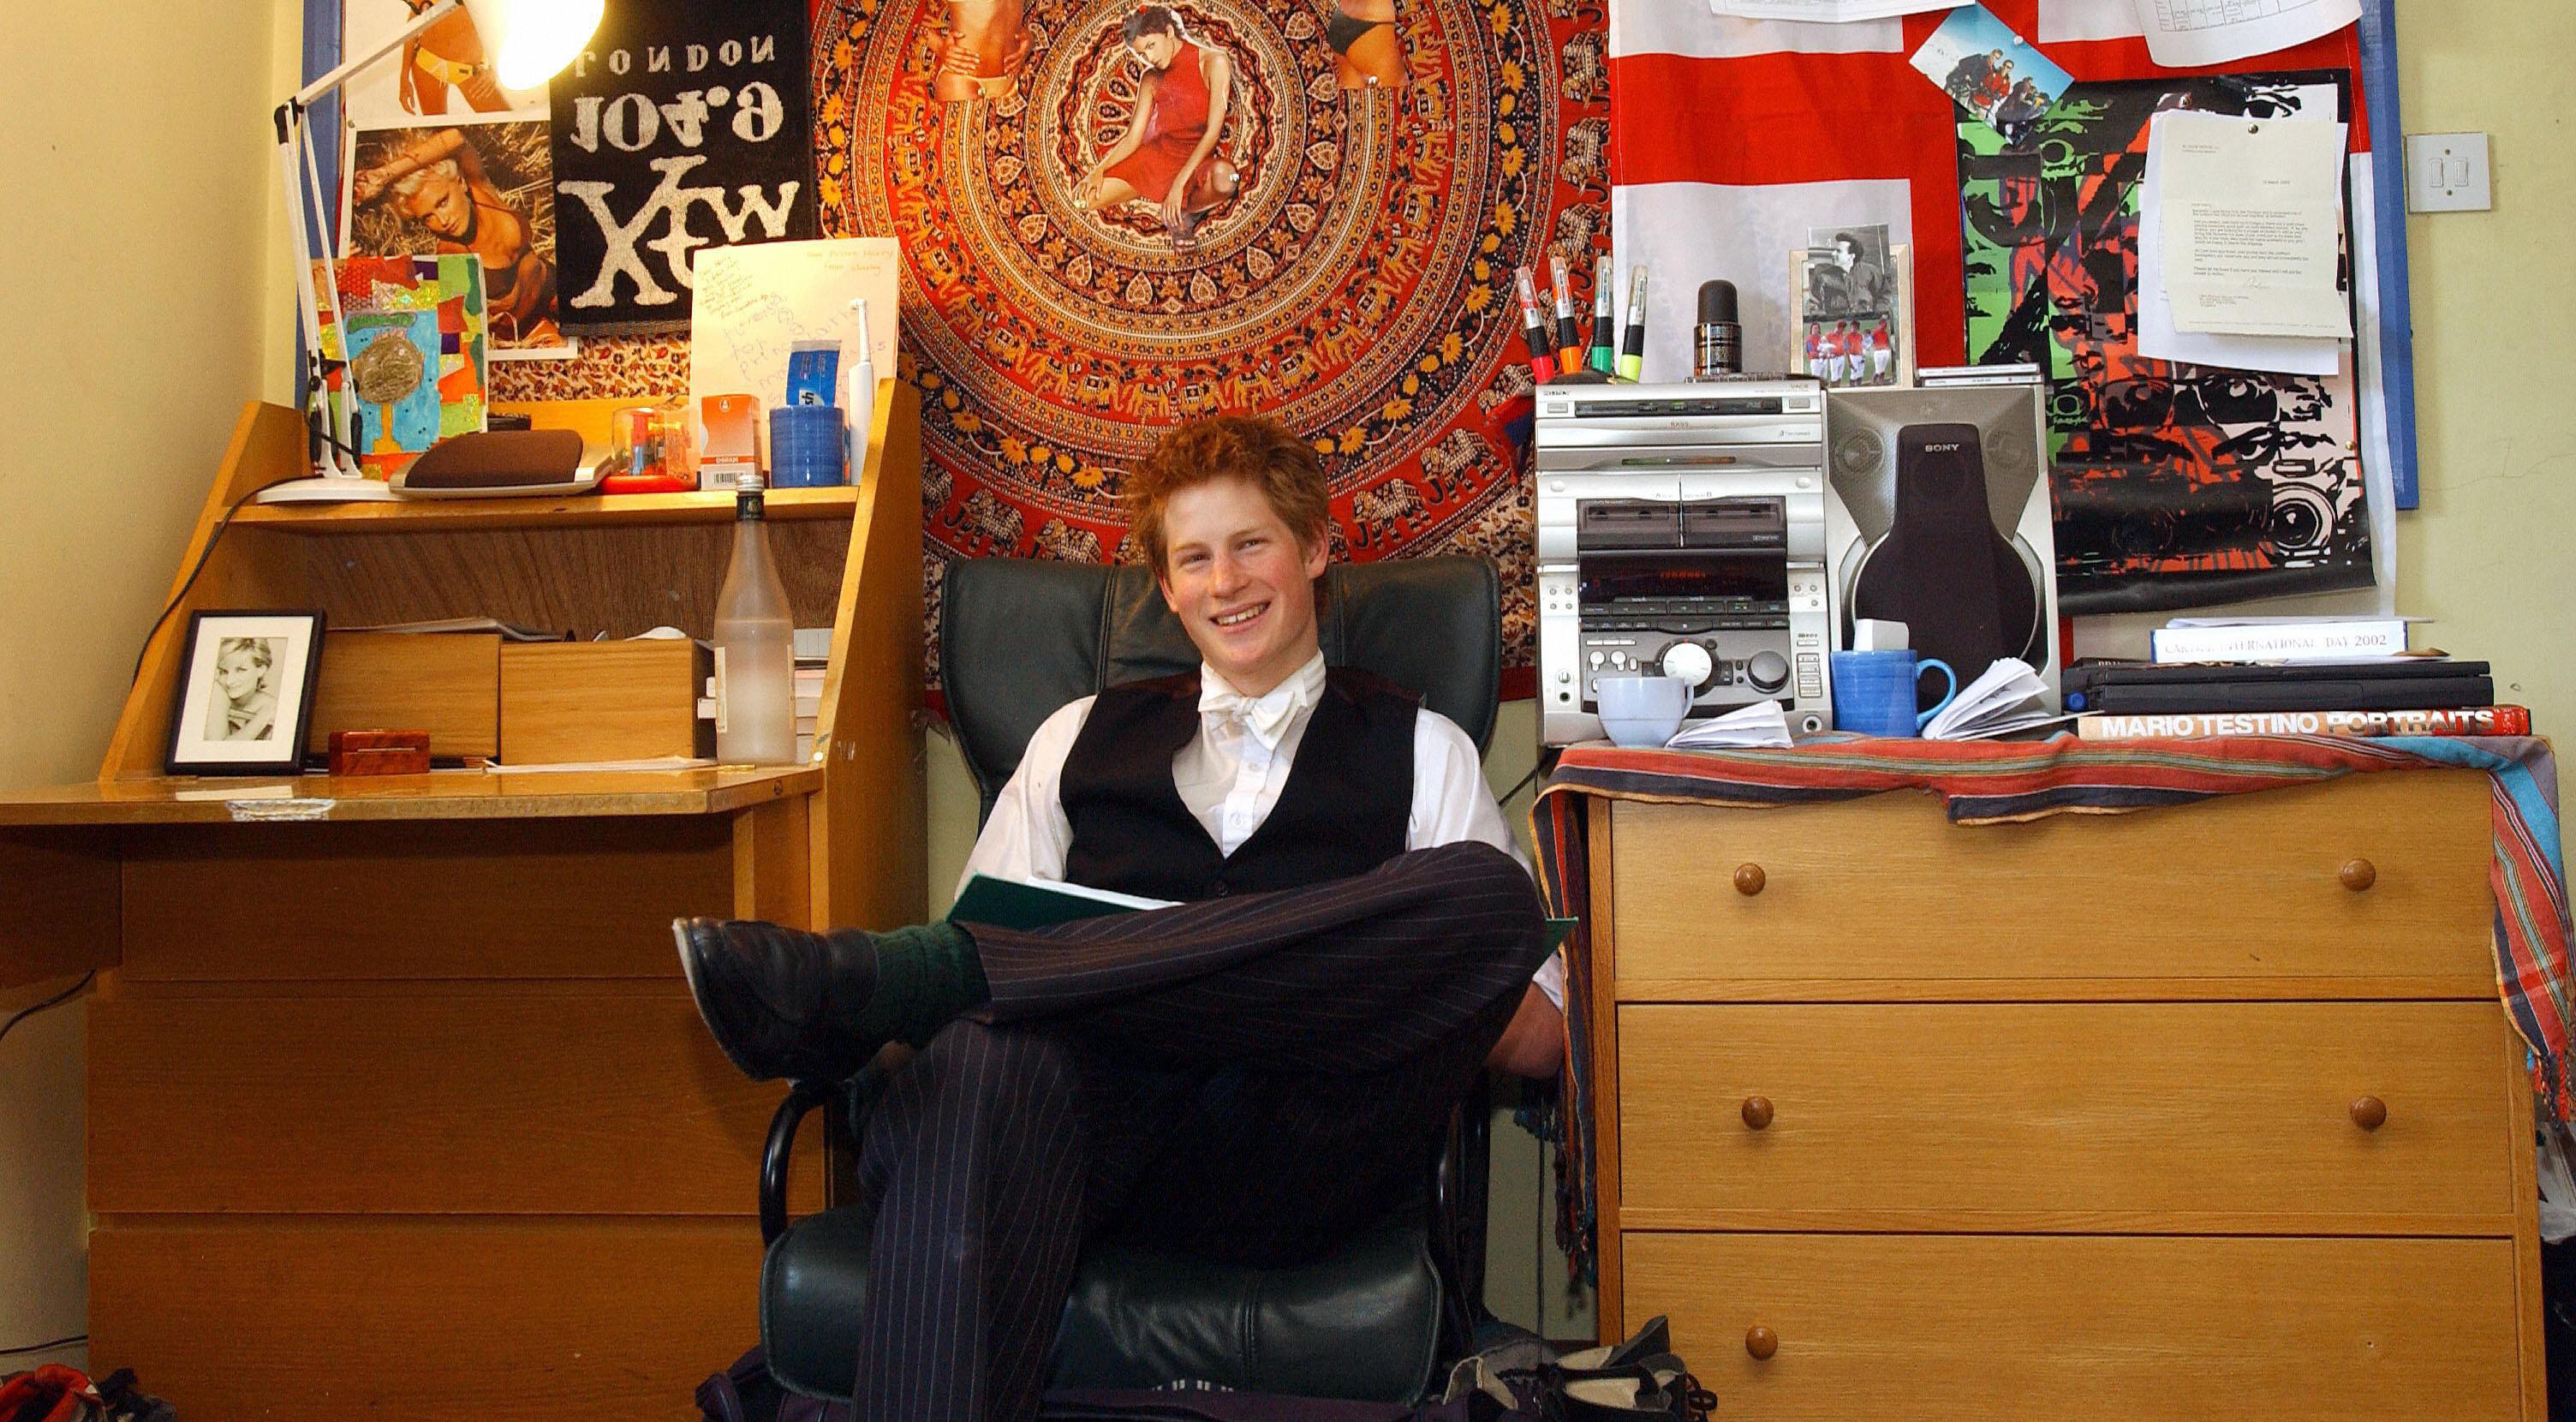 Prince Harry, the younger son of the Prince of Wales, sits 12 May 2003 in his room at Eton College. Within limits, students are allowed to decorate their room themselves.